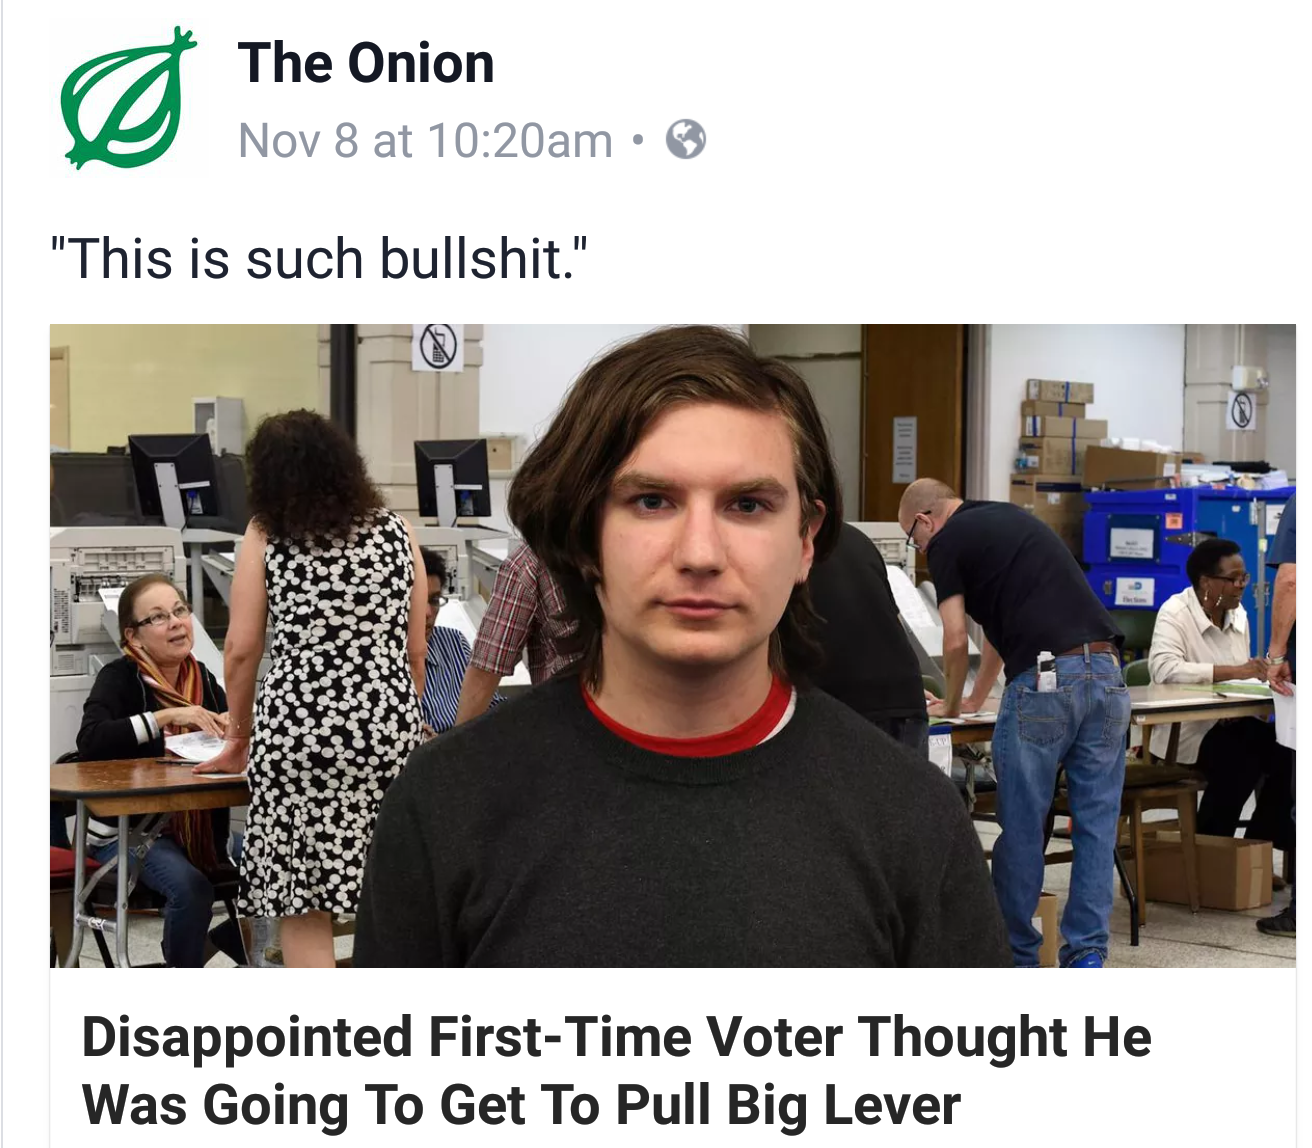 presentation - The Onion Nov 8 at am "This is such bullshit." Disappointed FirstTime Voter Thought He Was Going To Get To Pull Big Lever